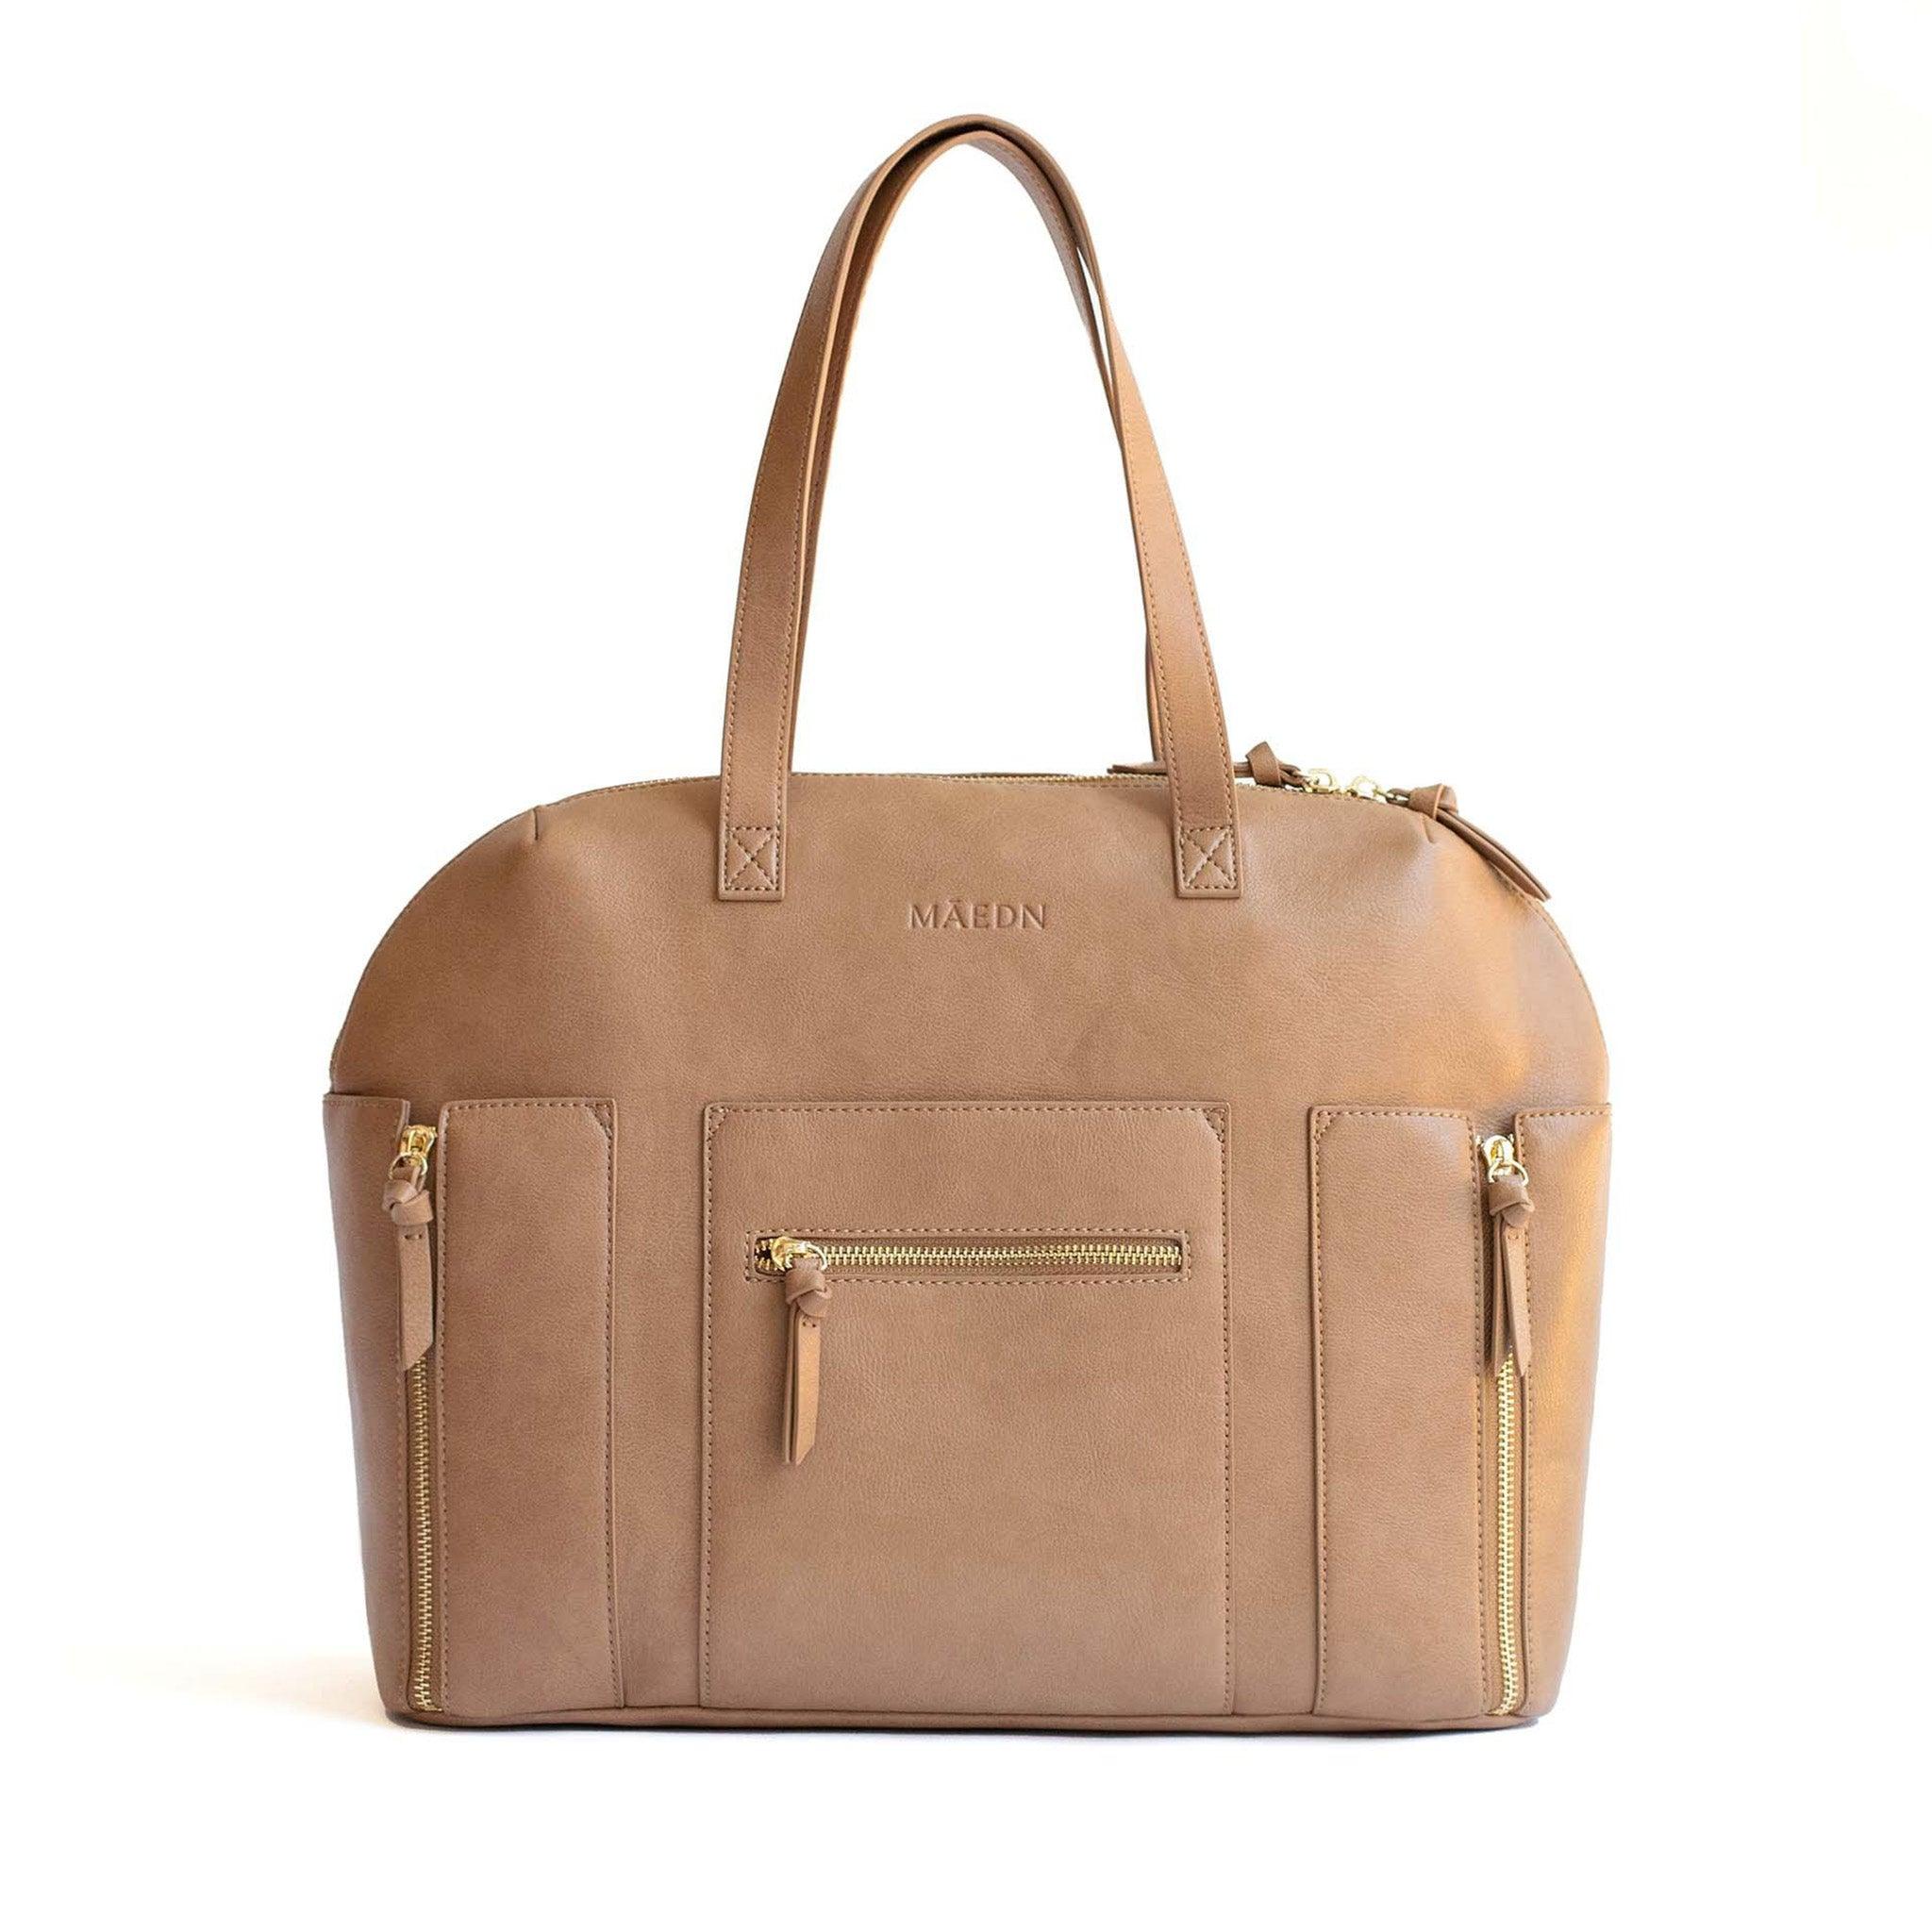 Camel Carryall Convertible Tote - Māedn